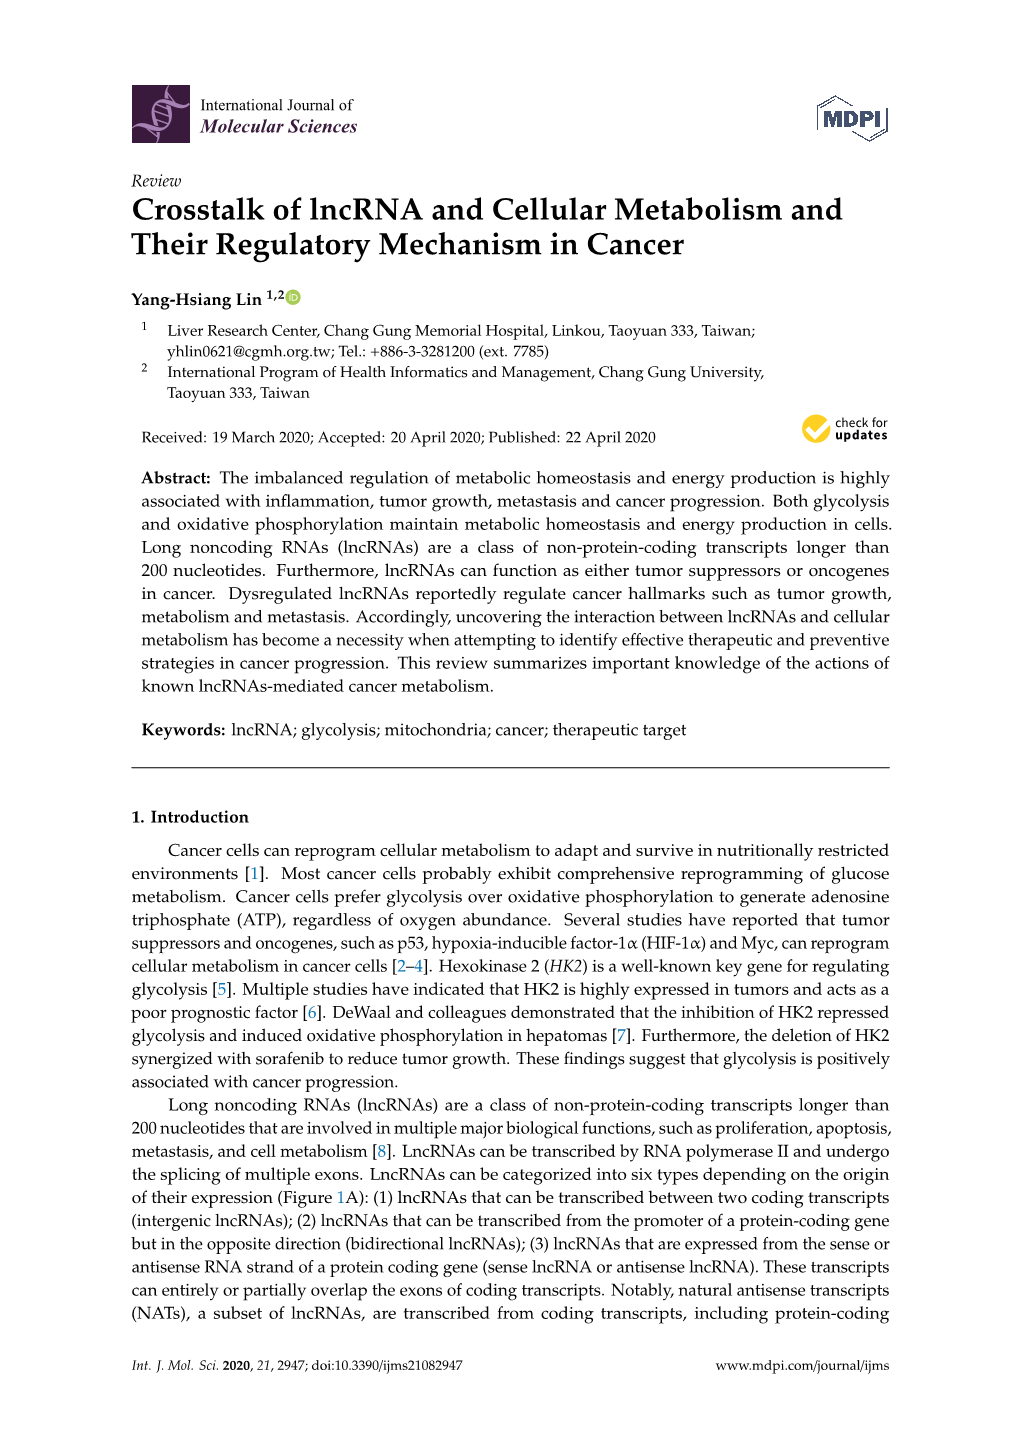 Crosstalk of Lncrna and Cellular Metabolism and Their Regulatory Mechanism in Cancer